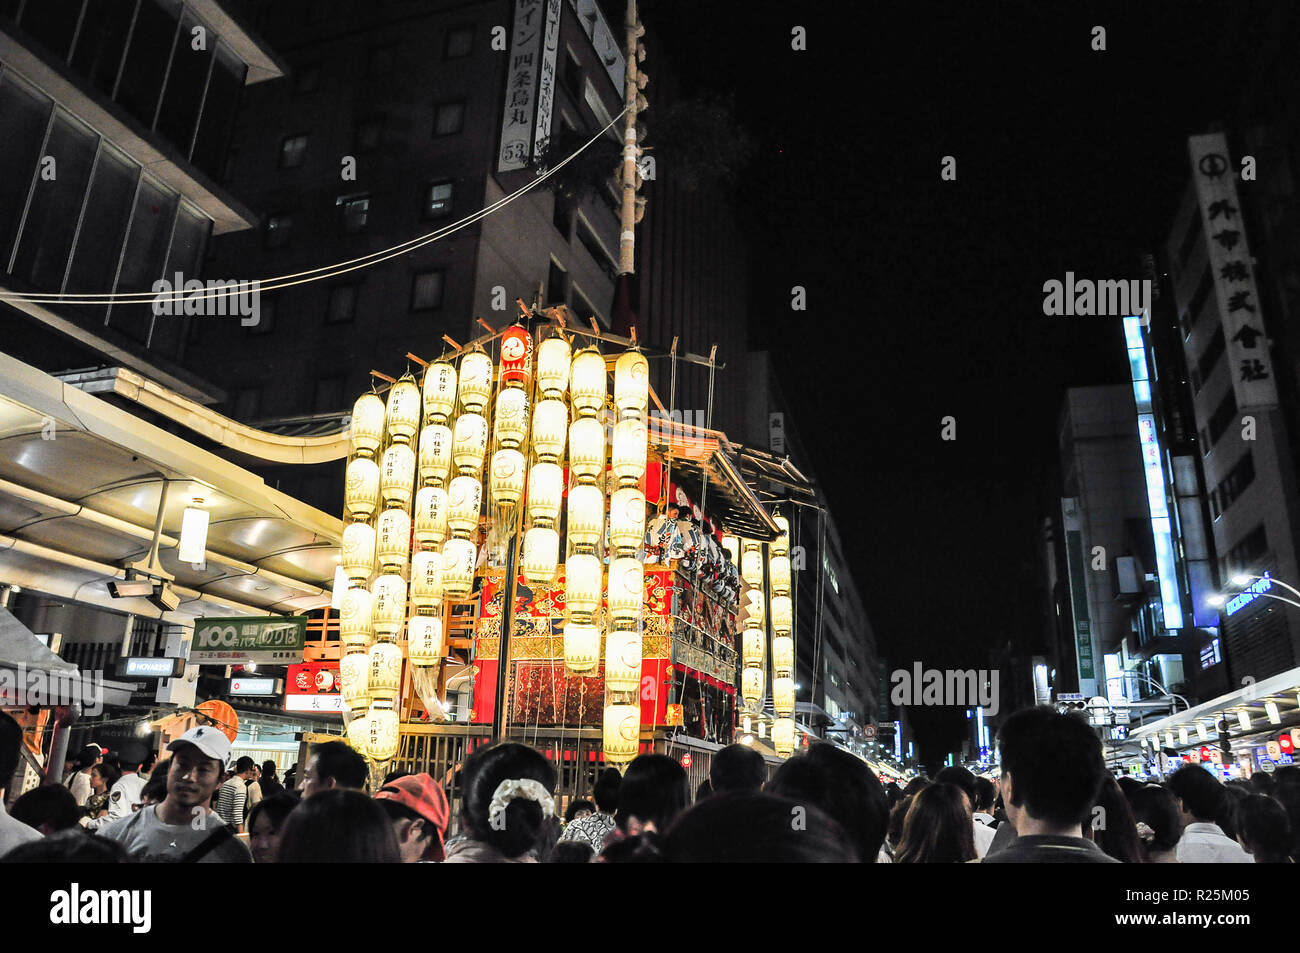 KYOTO, JAPAN - JULY 15, 2011: A portable shrine covered in red and gold embroidered cloth and attached to glowing paper lanterns Stock Photo